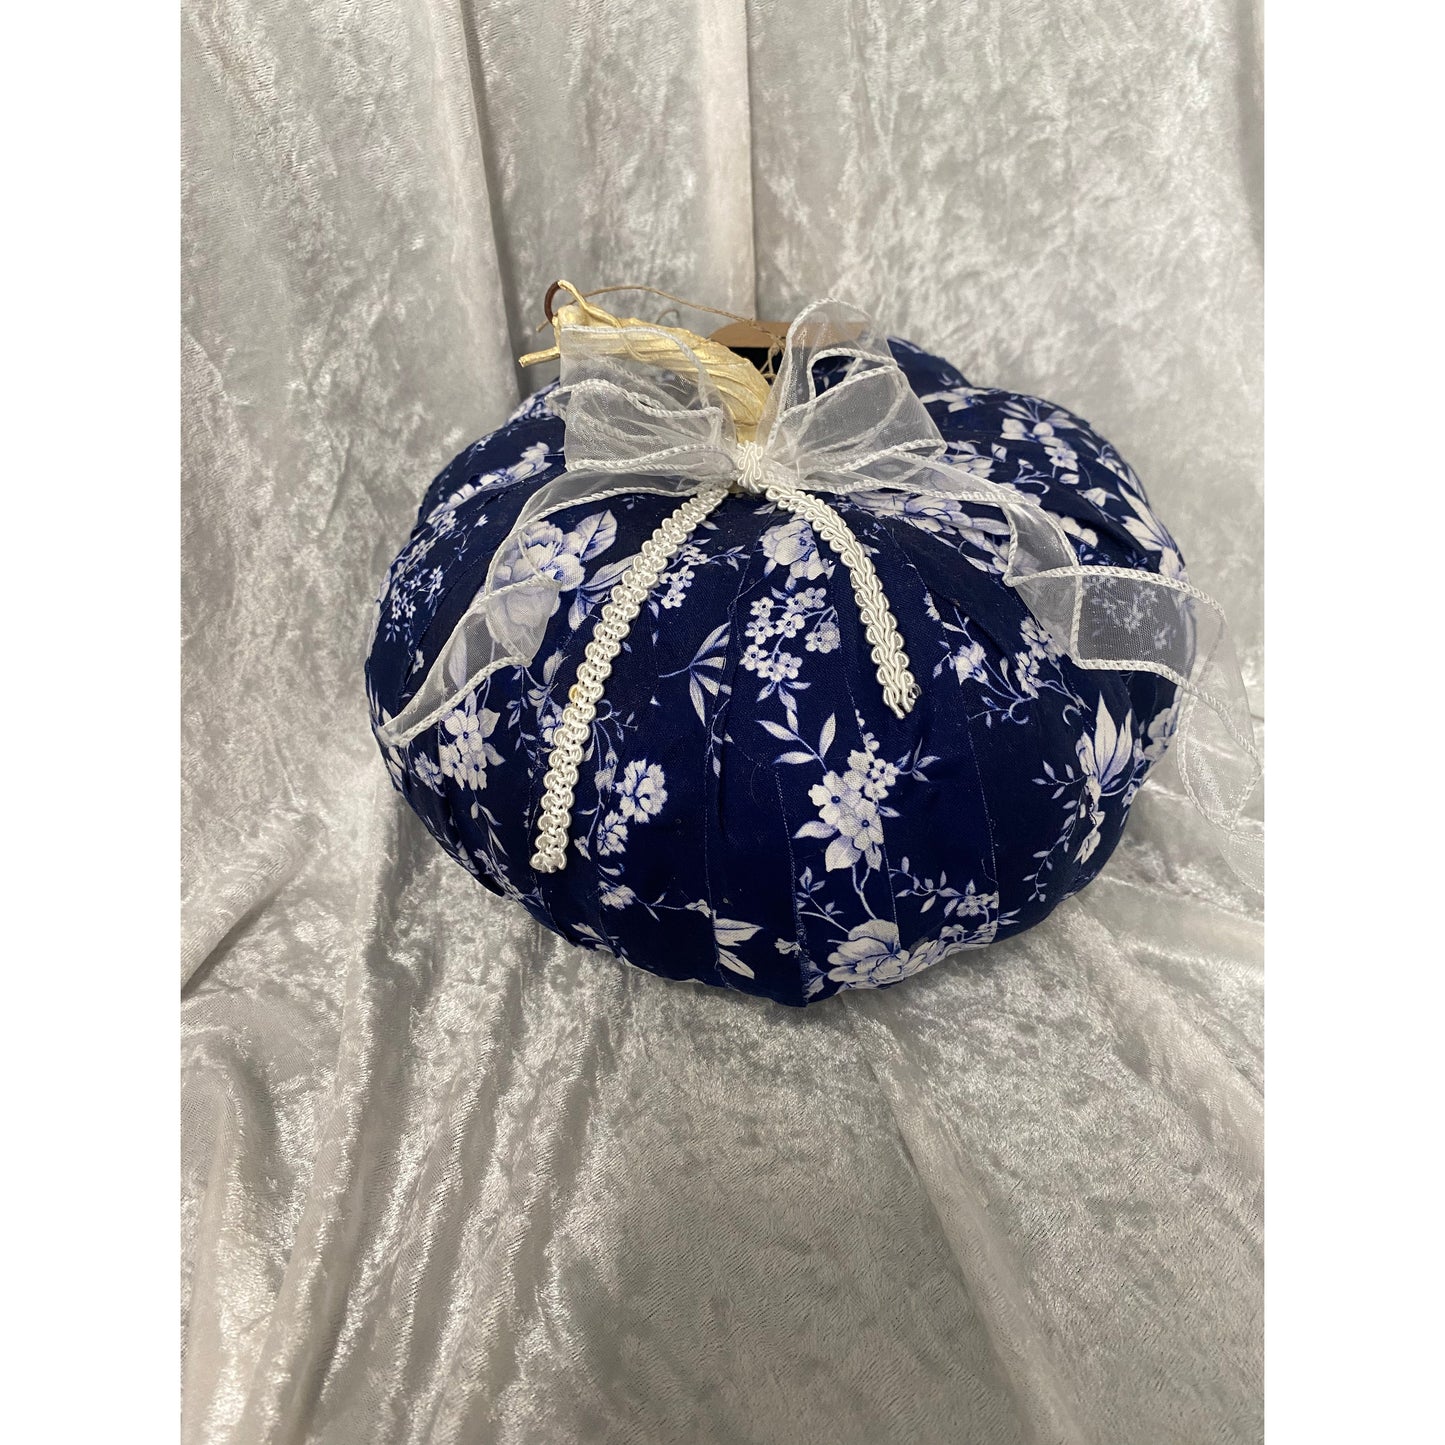 One of a Kind Fabric Decoupage Pumpkin in Dark Chinoiserie with White Bow Medium A